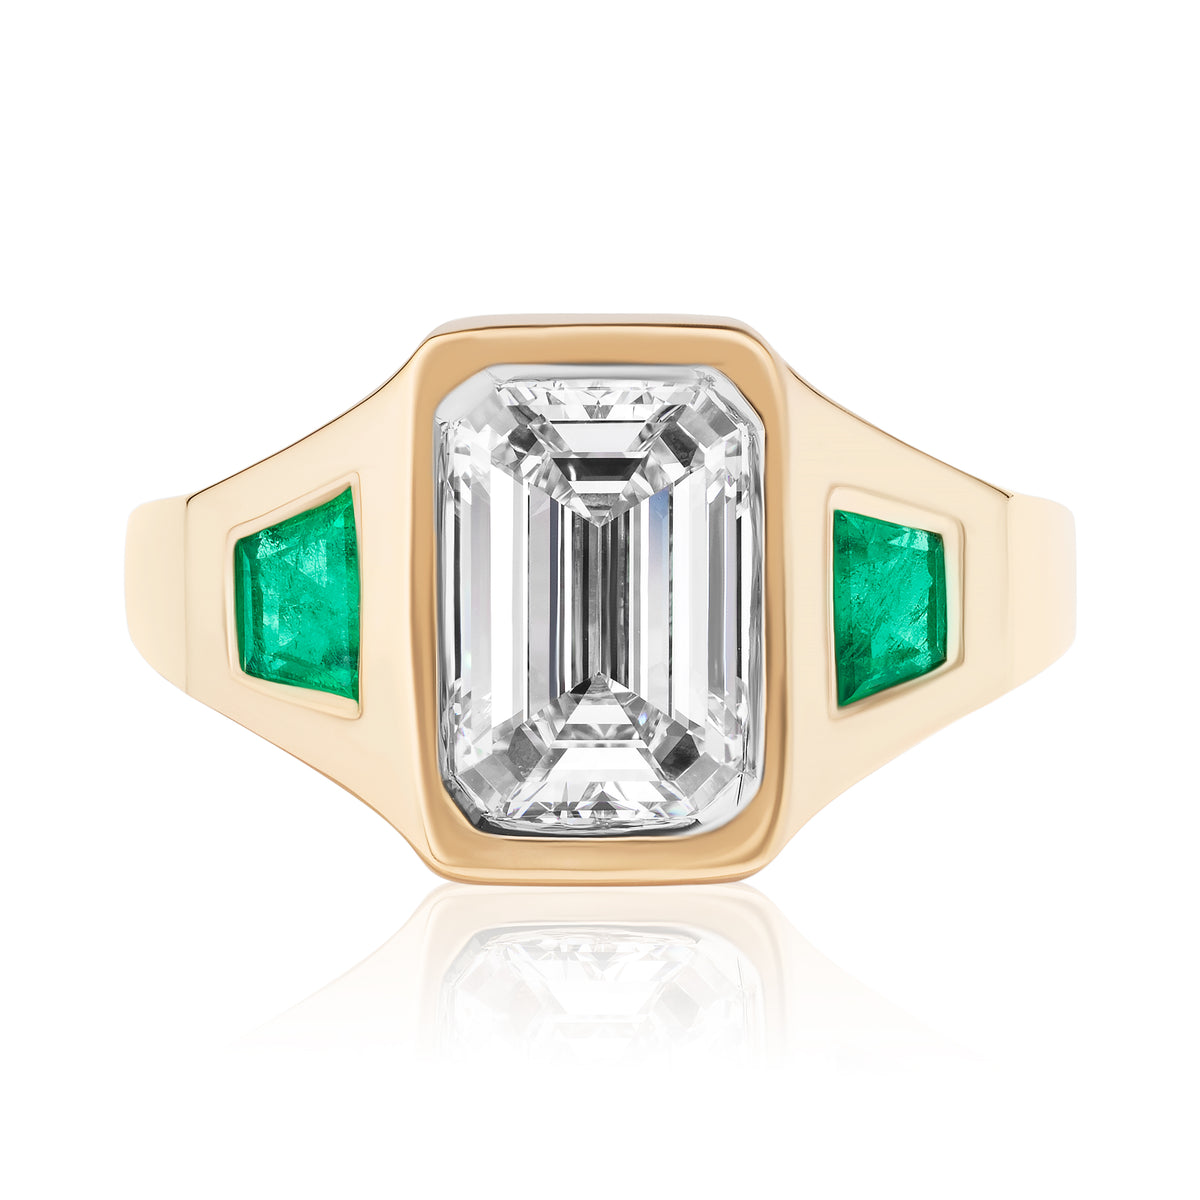 Gypsy Ring in Yellow Gold with Emerald Cut Diamond and Emerald Side Stones